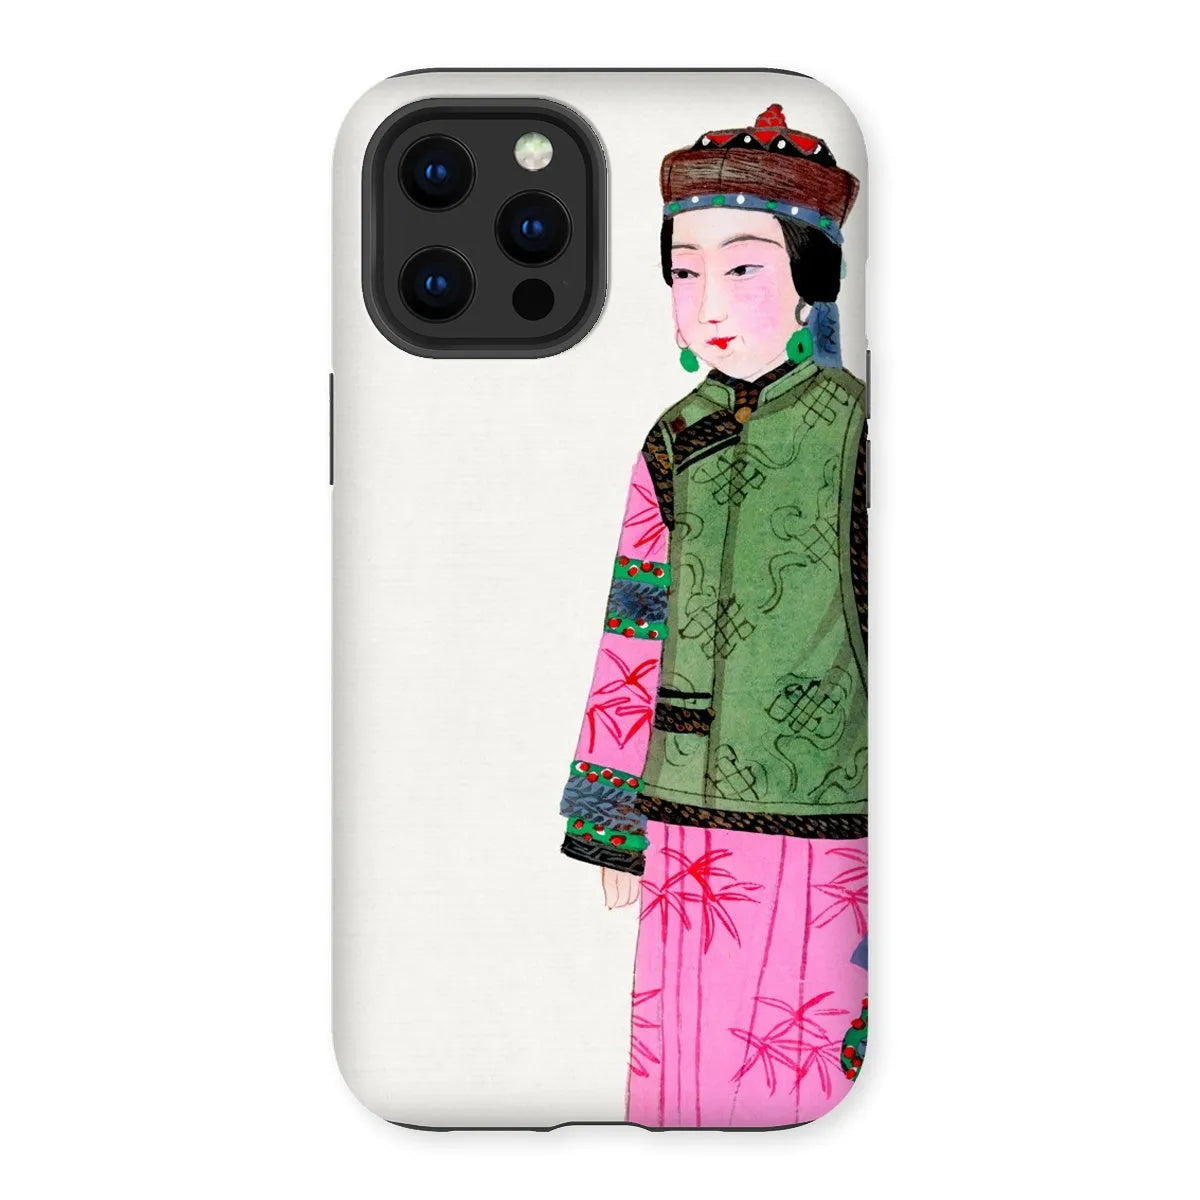 Noblewoman In Winter - Chinese Aesthetic Art Phone Case - Iphone 13 Pro Max / Matte - Mobile Phone Cases - Aesthetic Art